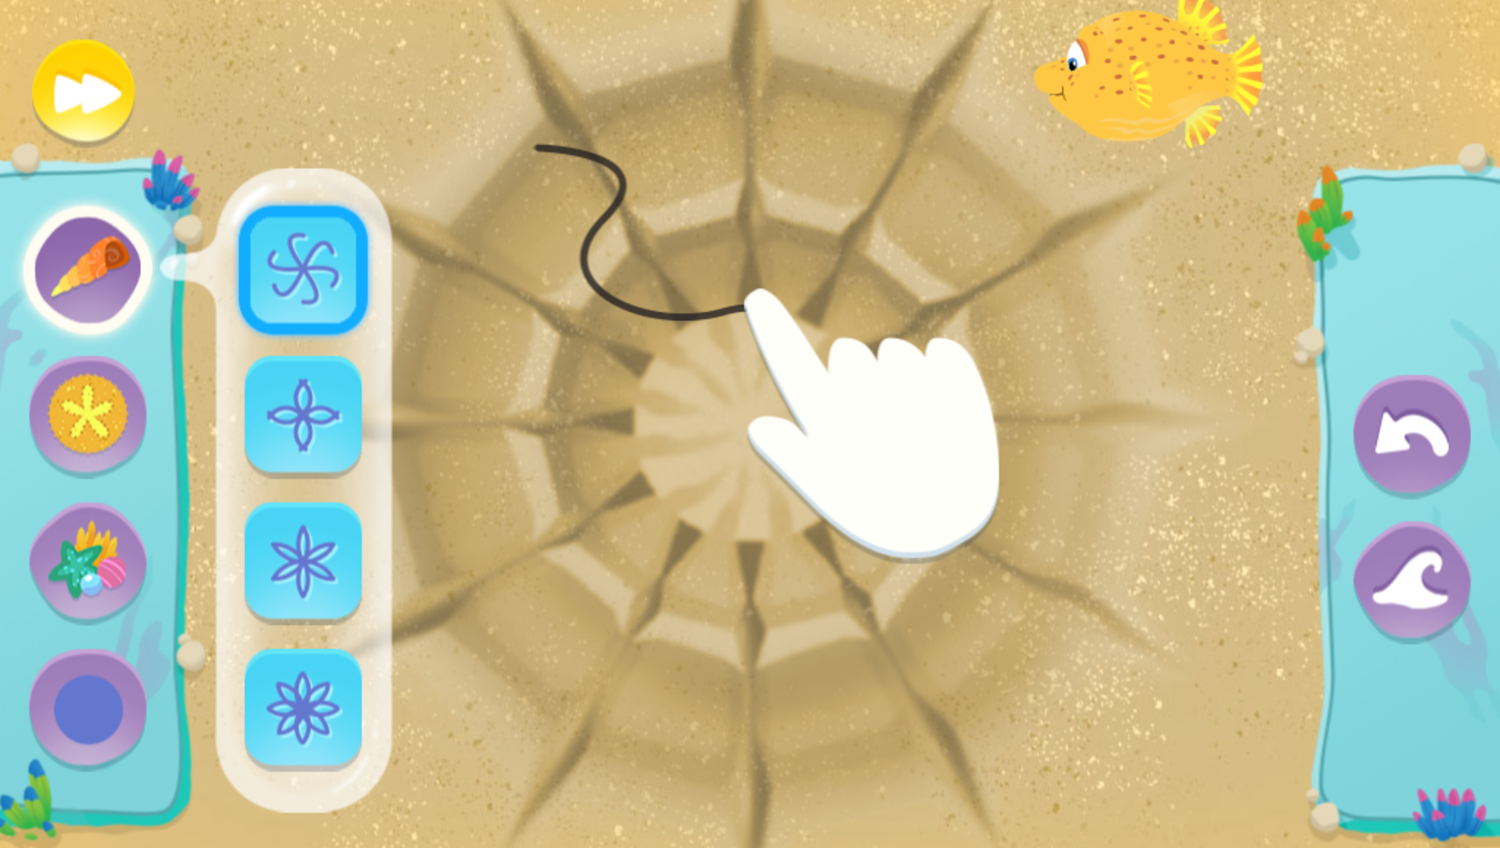 Splash and Bubbles Sand Art Spectacular Game How To Apply Art Screenshot.